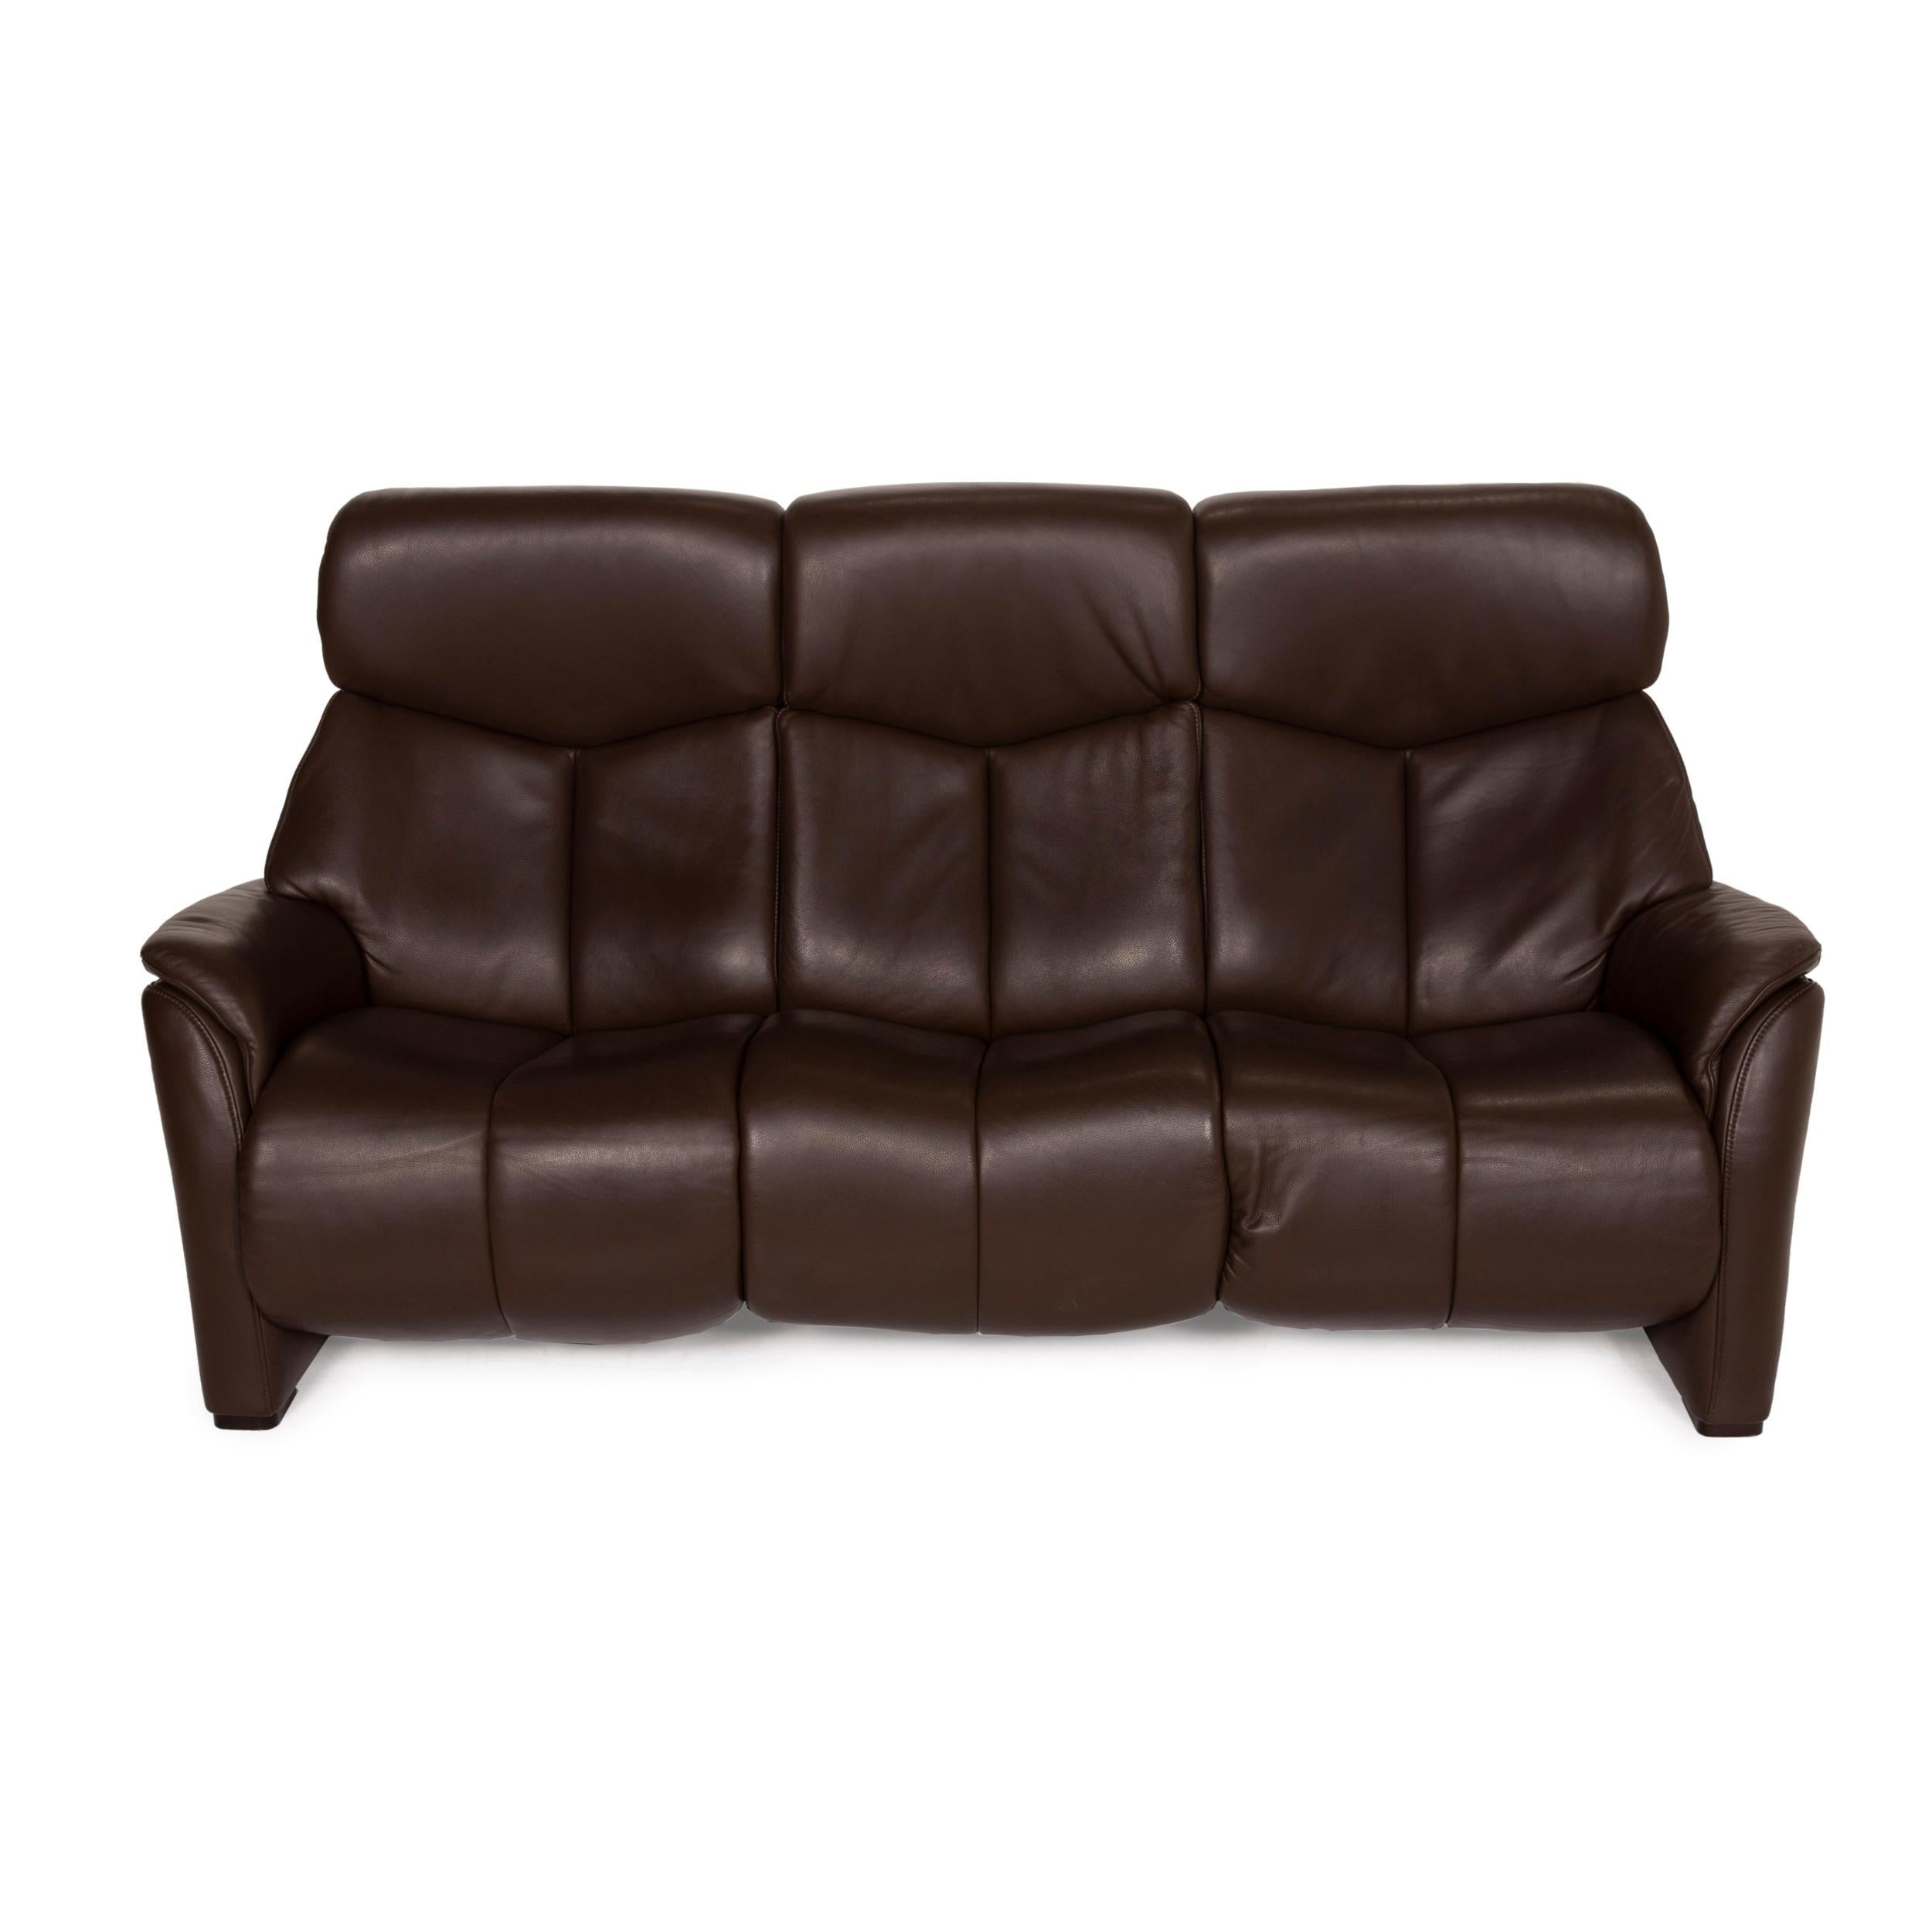 Hukla Nevada Leather Sofa Brown Three-Seater Electric Relaxation Function Dark 1